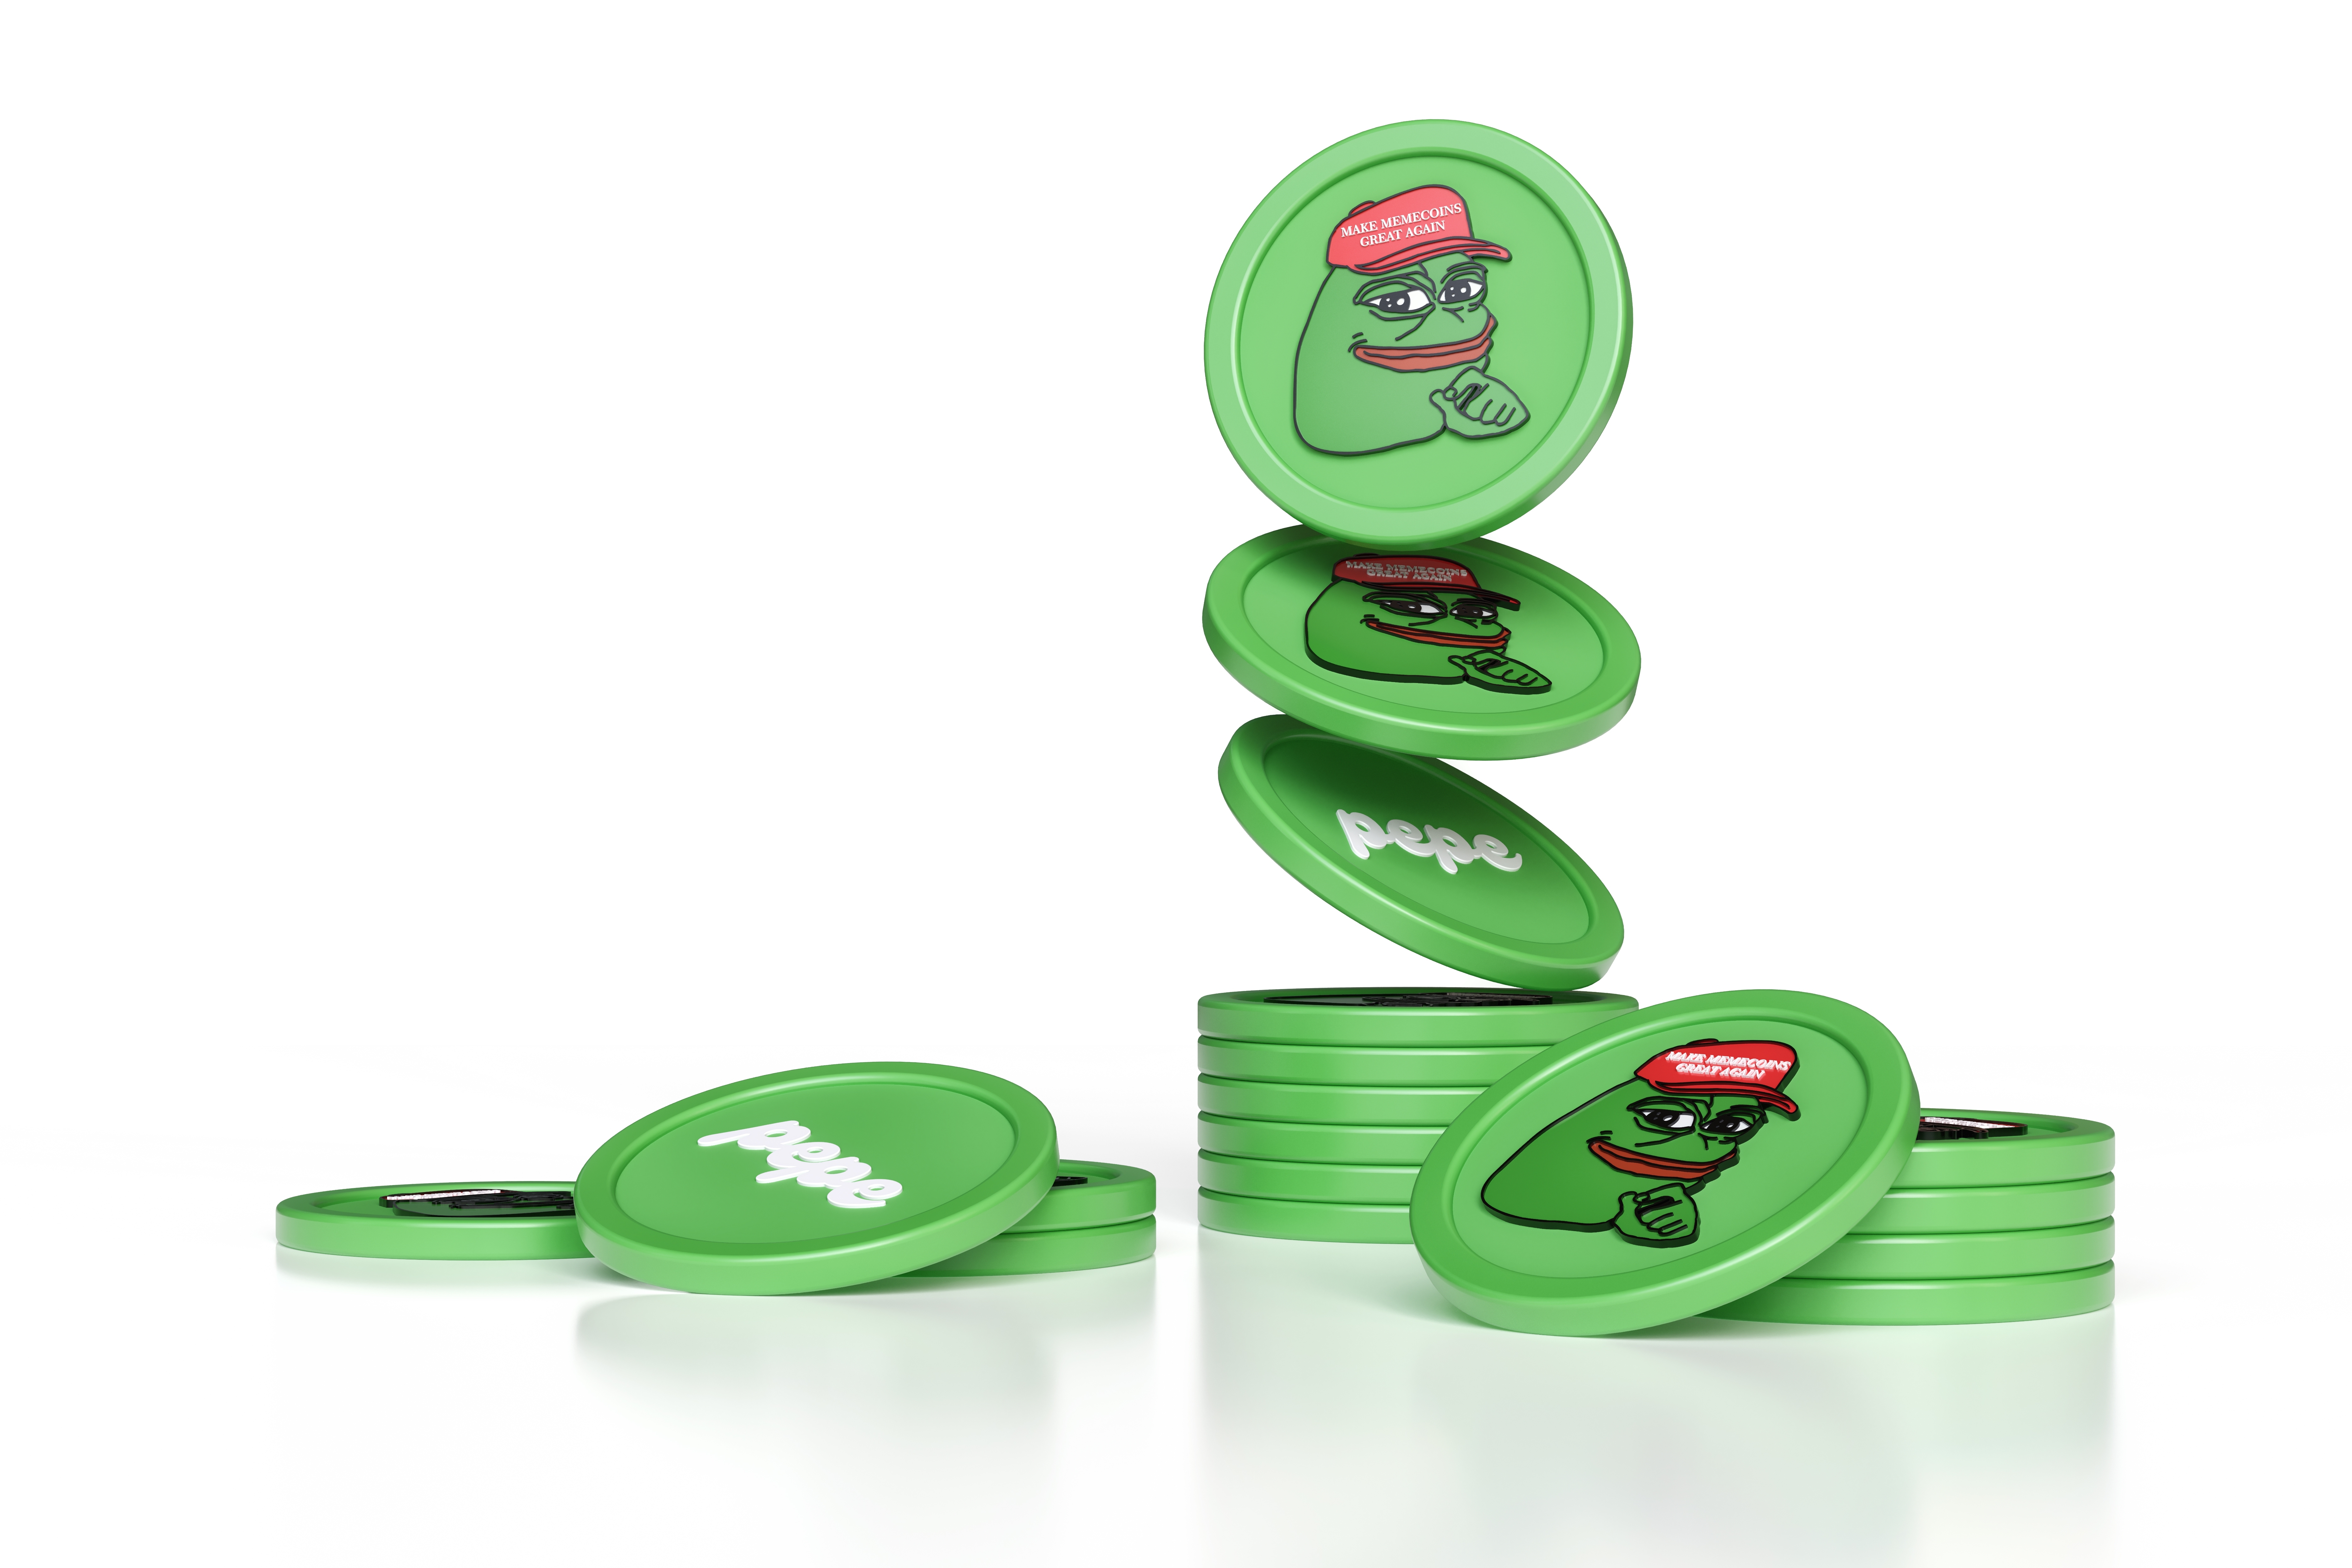 PEPE Coin Holders Stay Optimistic Amid Price Drop